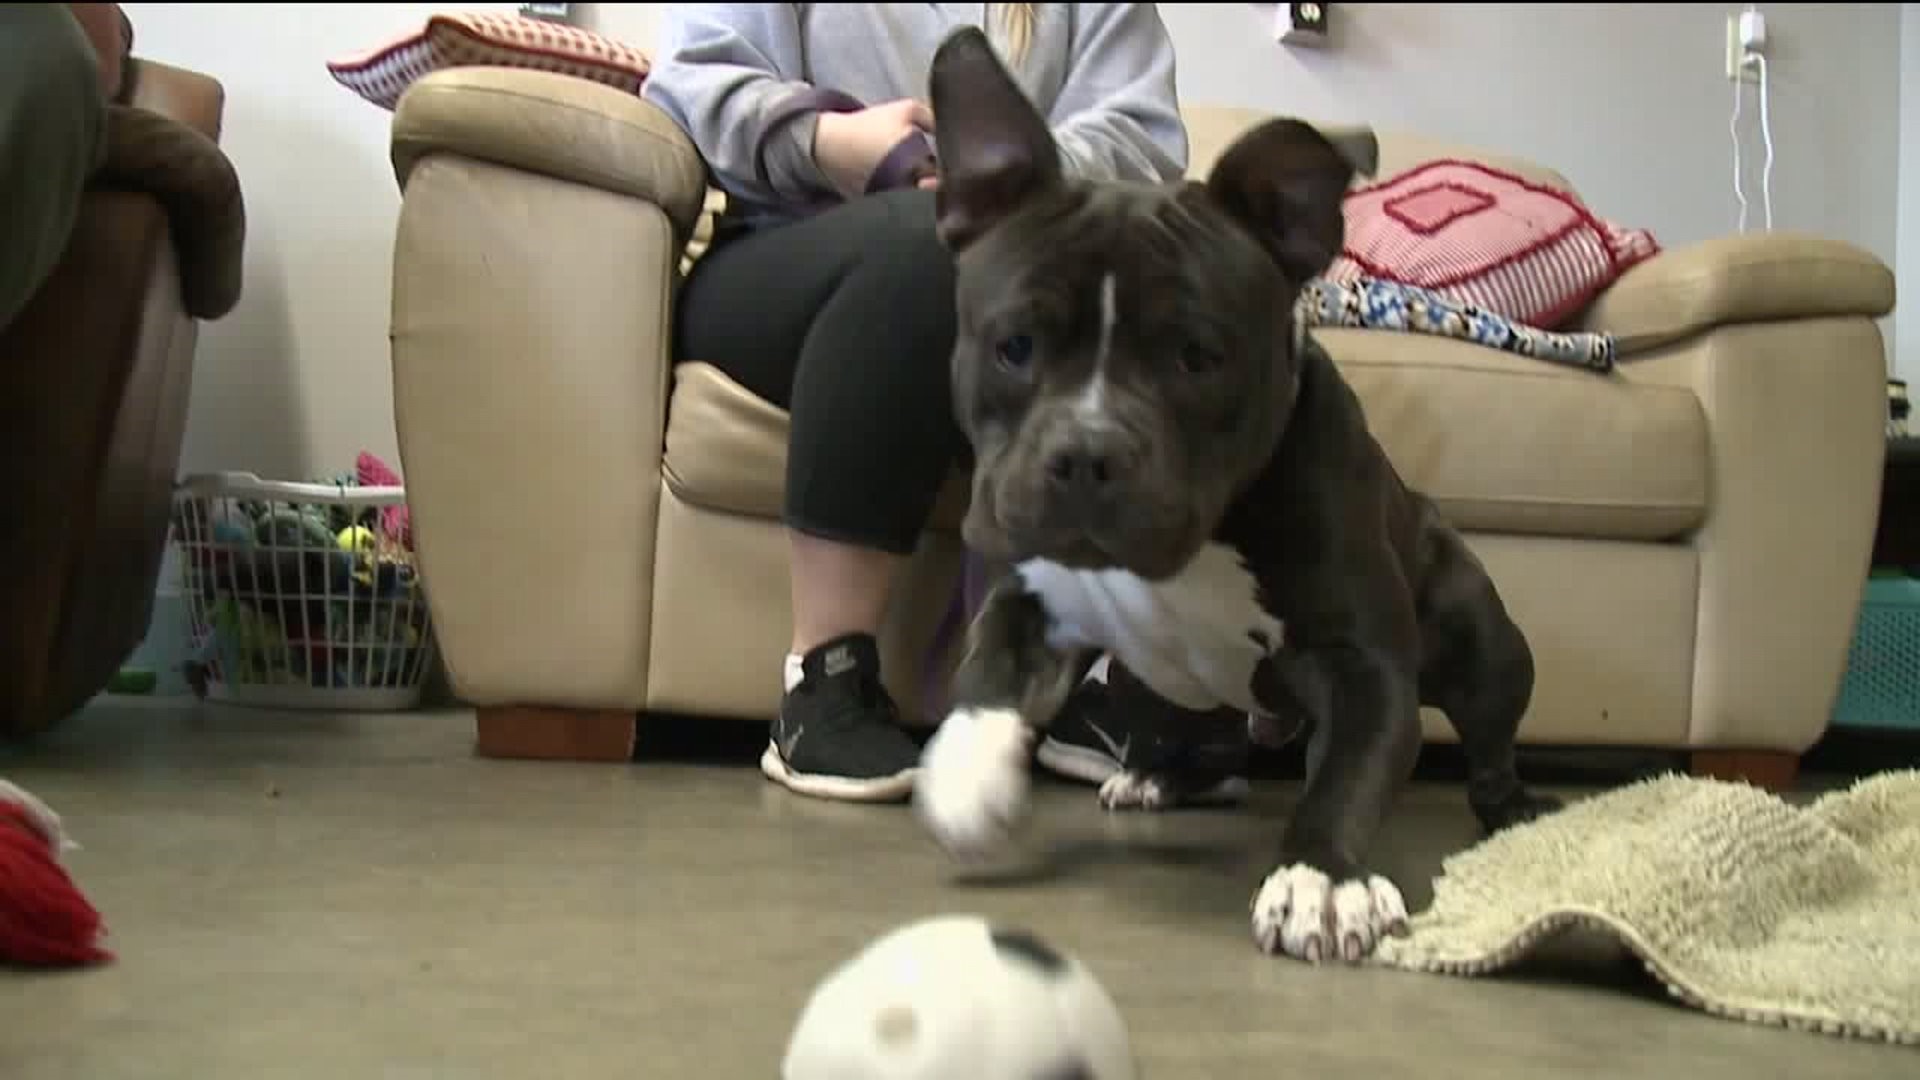 Free Adoptions for 'Empty the Shelter'